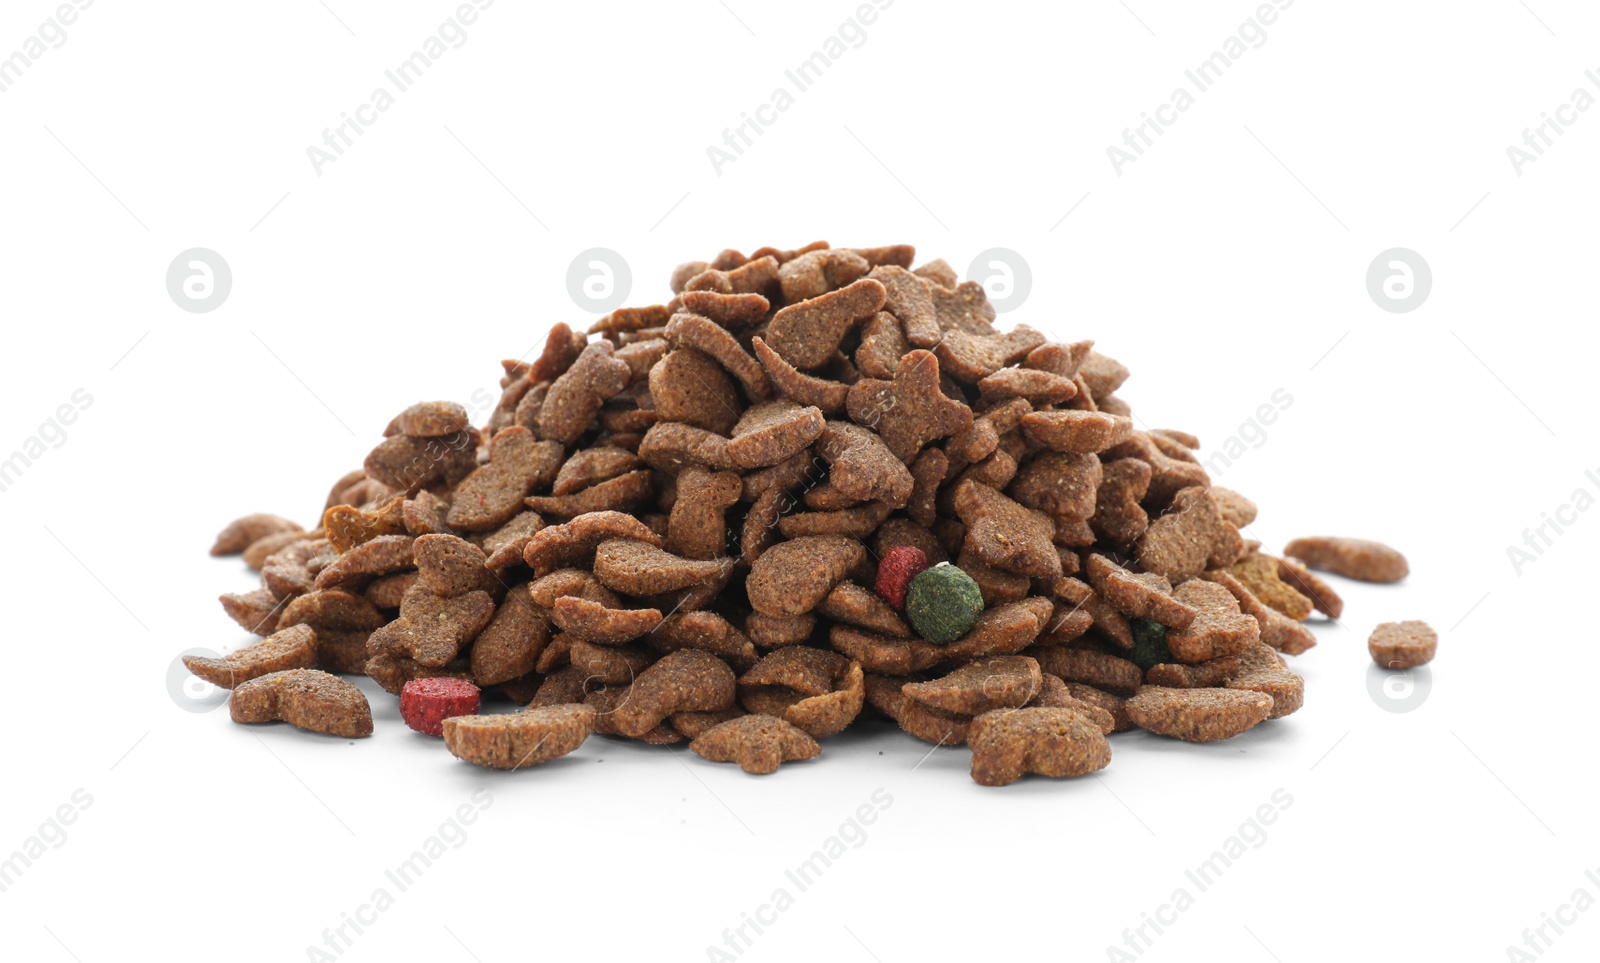 Photo of Pile of dry pet food on white background